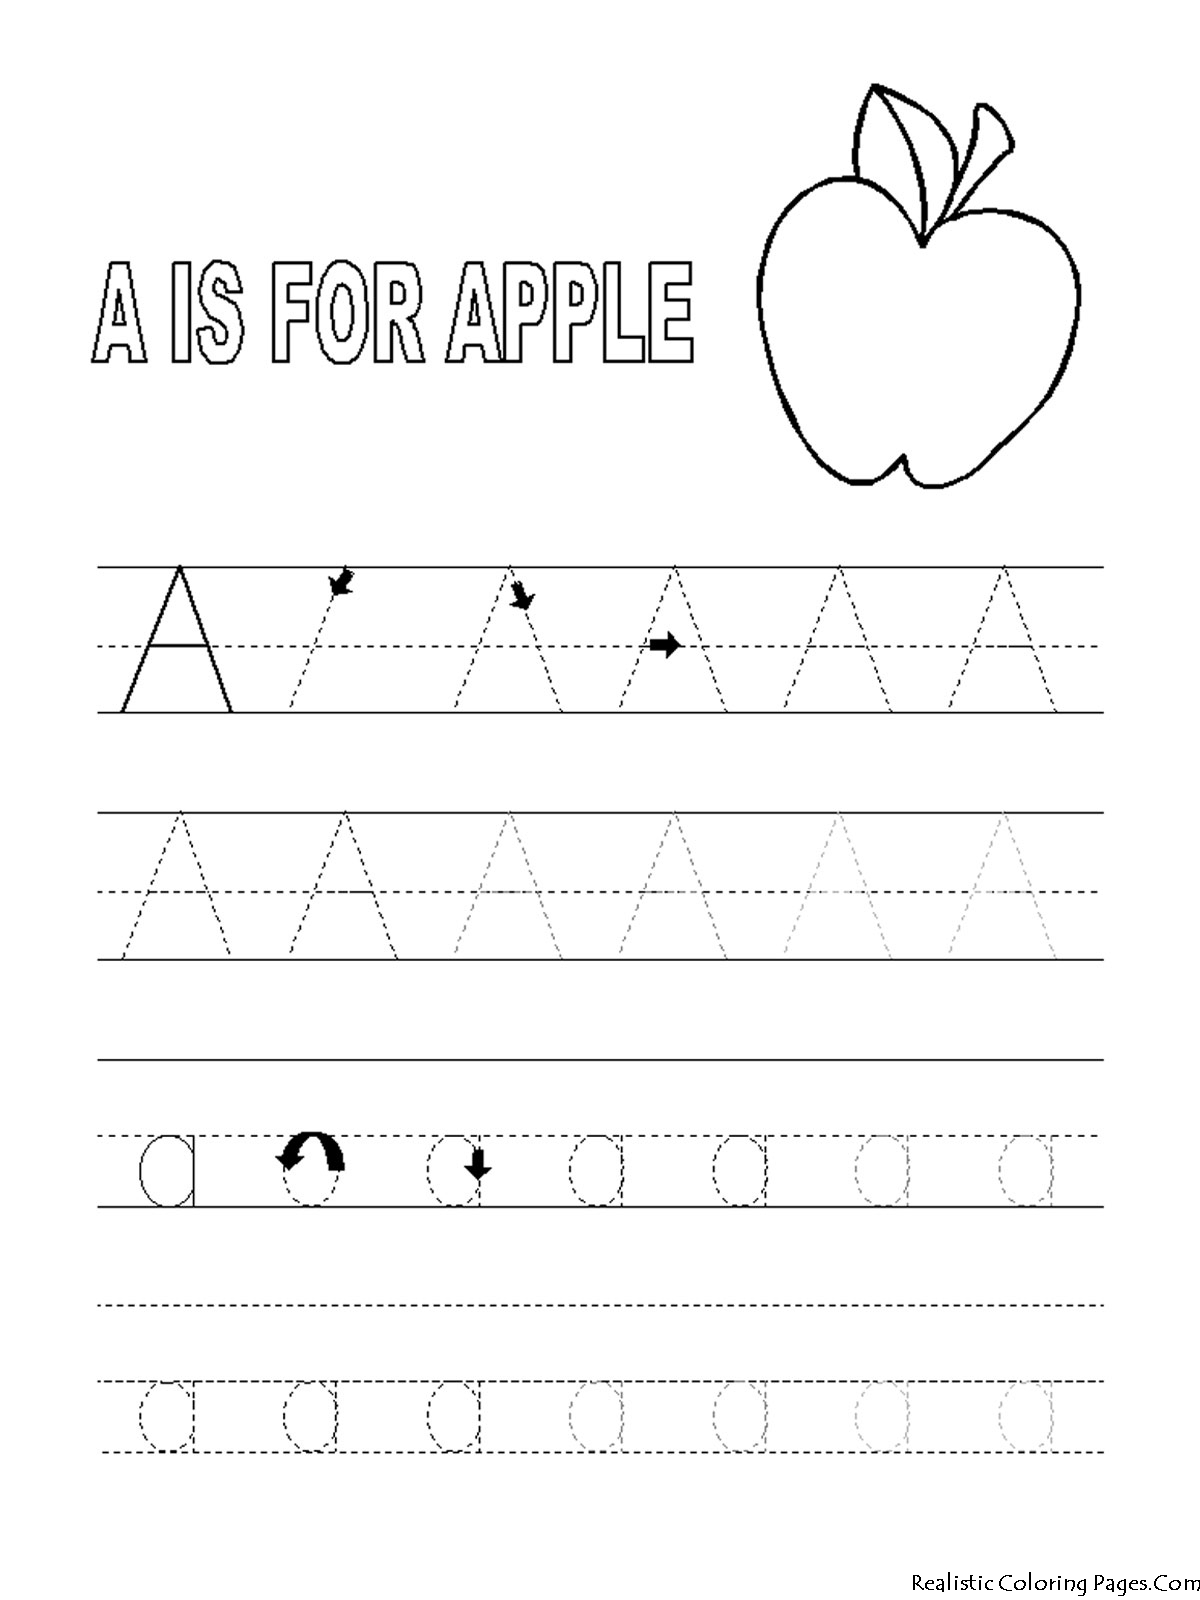 Alphabet Letter Tracing Pages